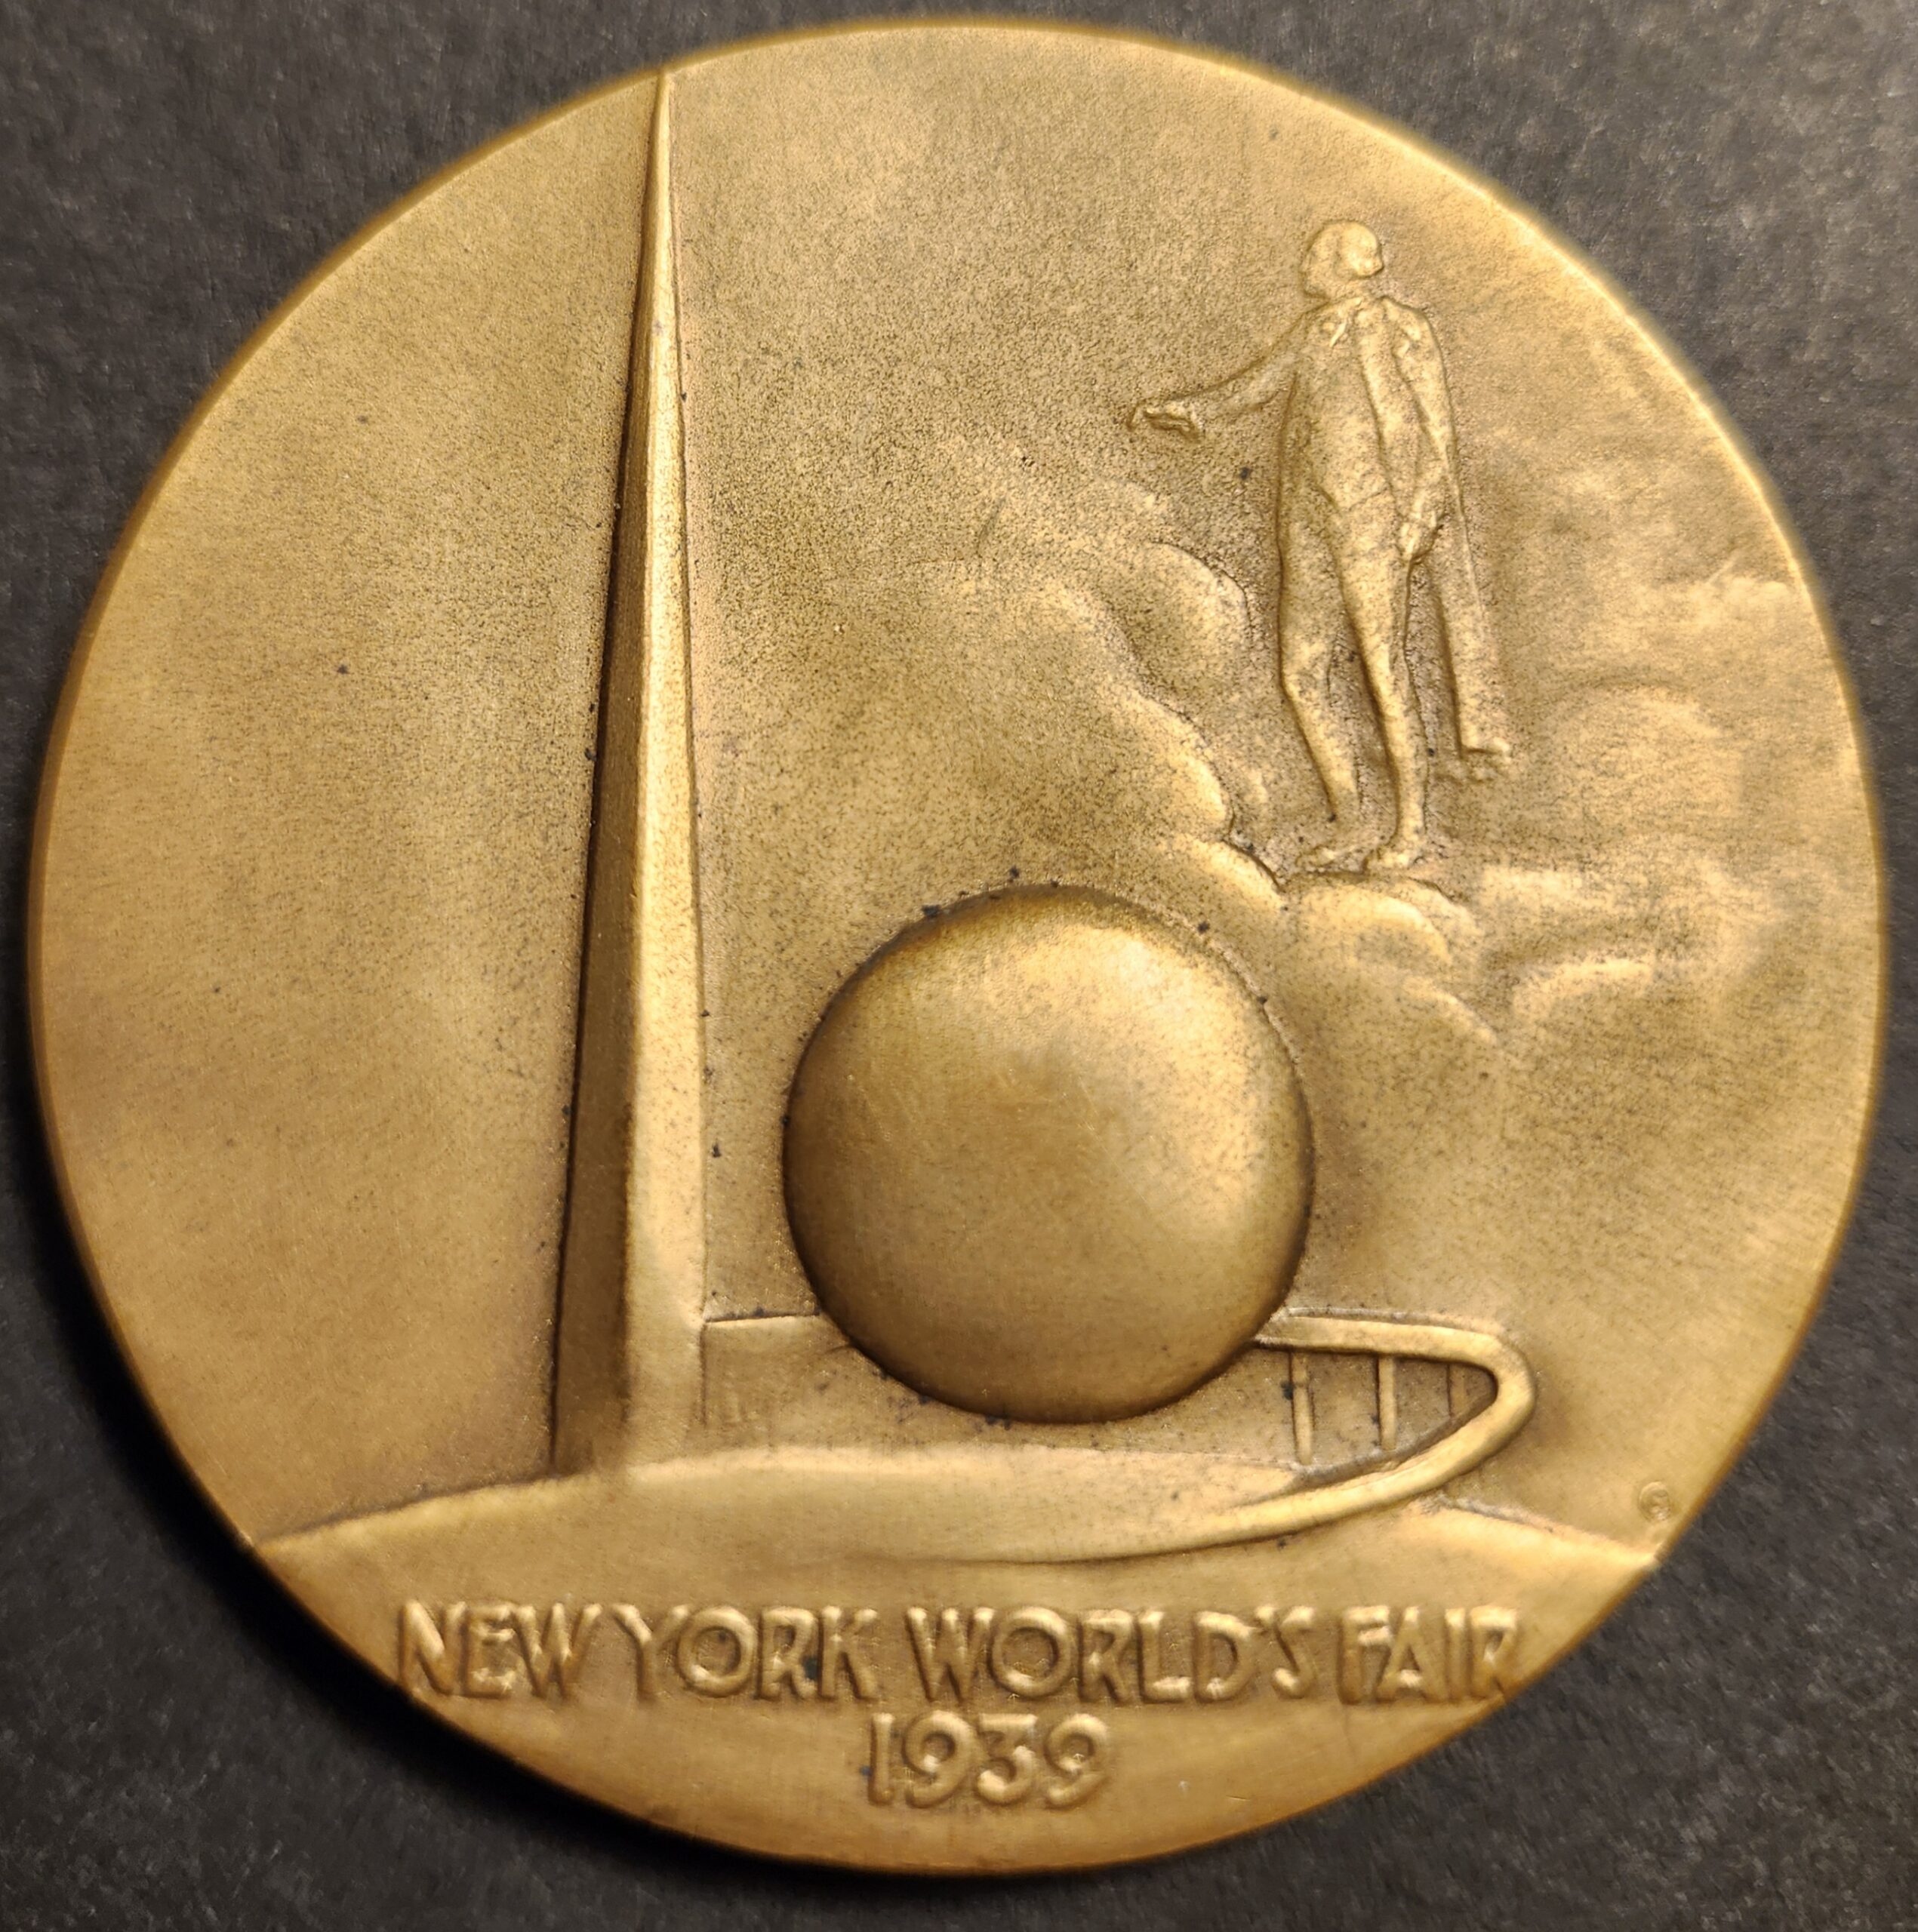 Medals of the 1939 New York World’s Fair – Official, Commemorative and Award Medals